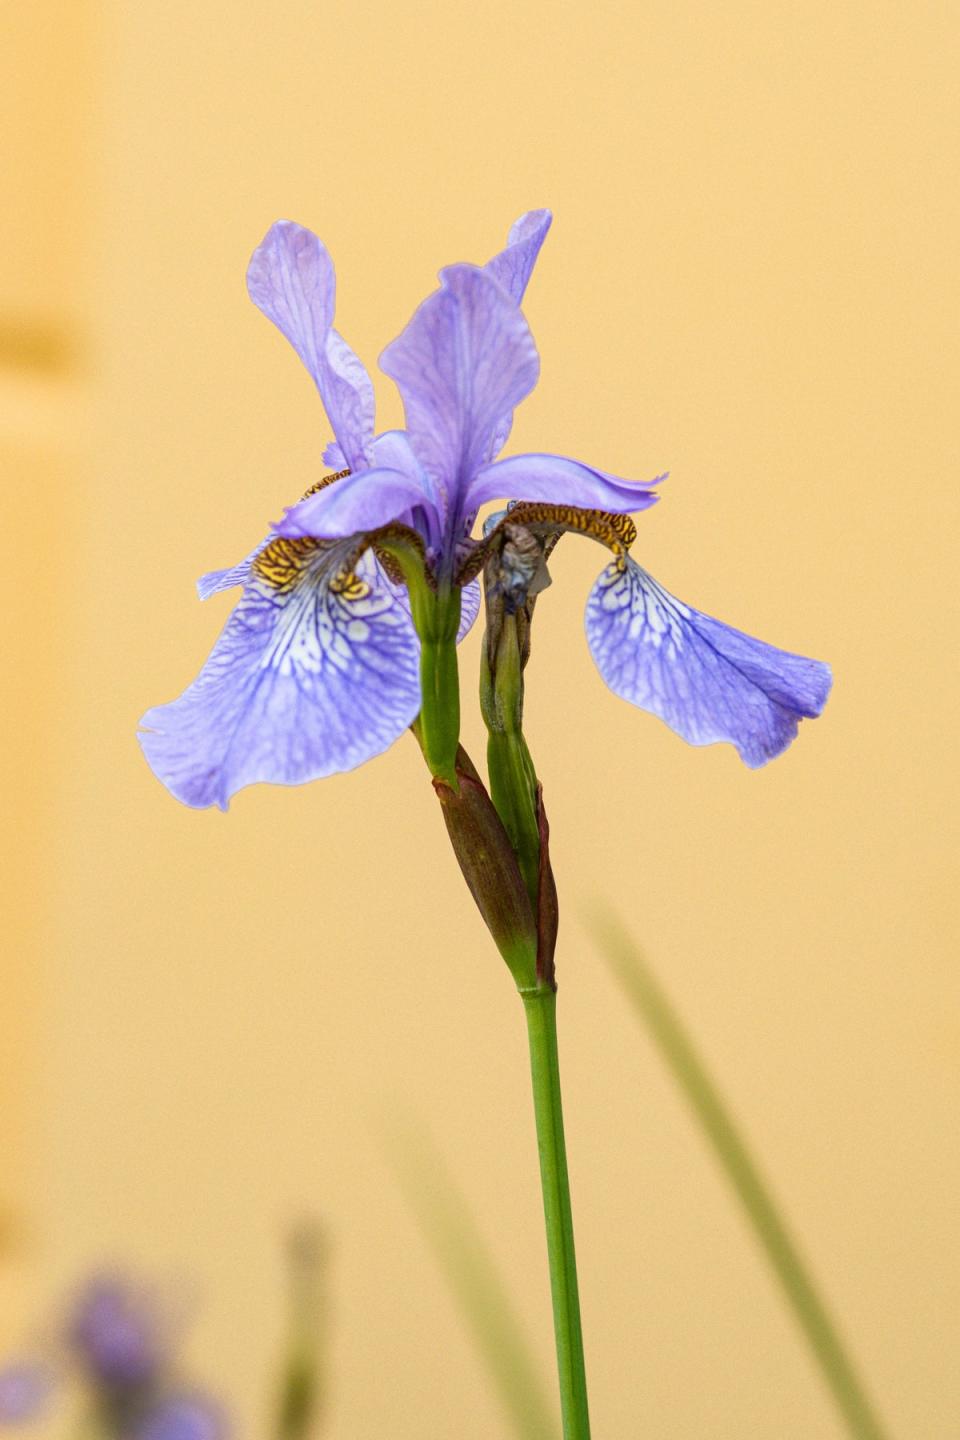 Add irises to your bouquet this Mother’s Day (Siegfried Poepperl / Pexels)